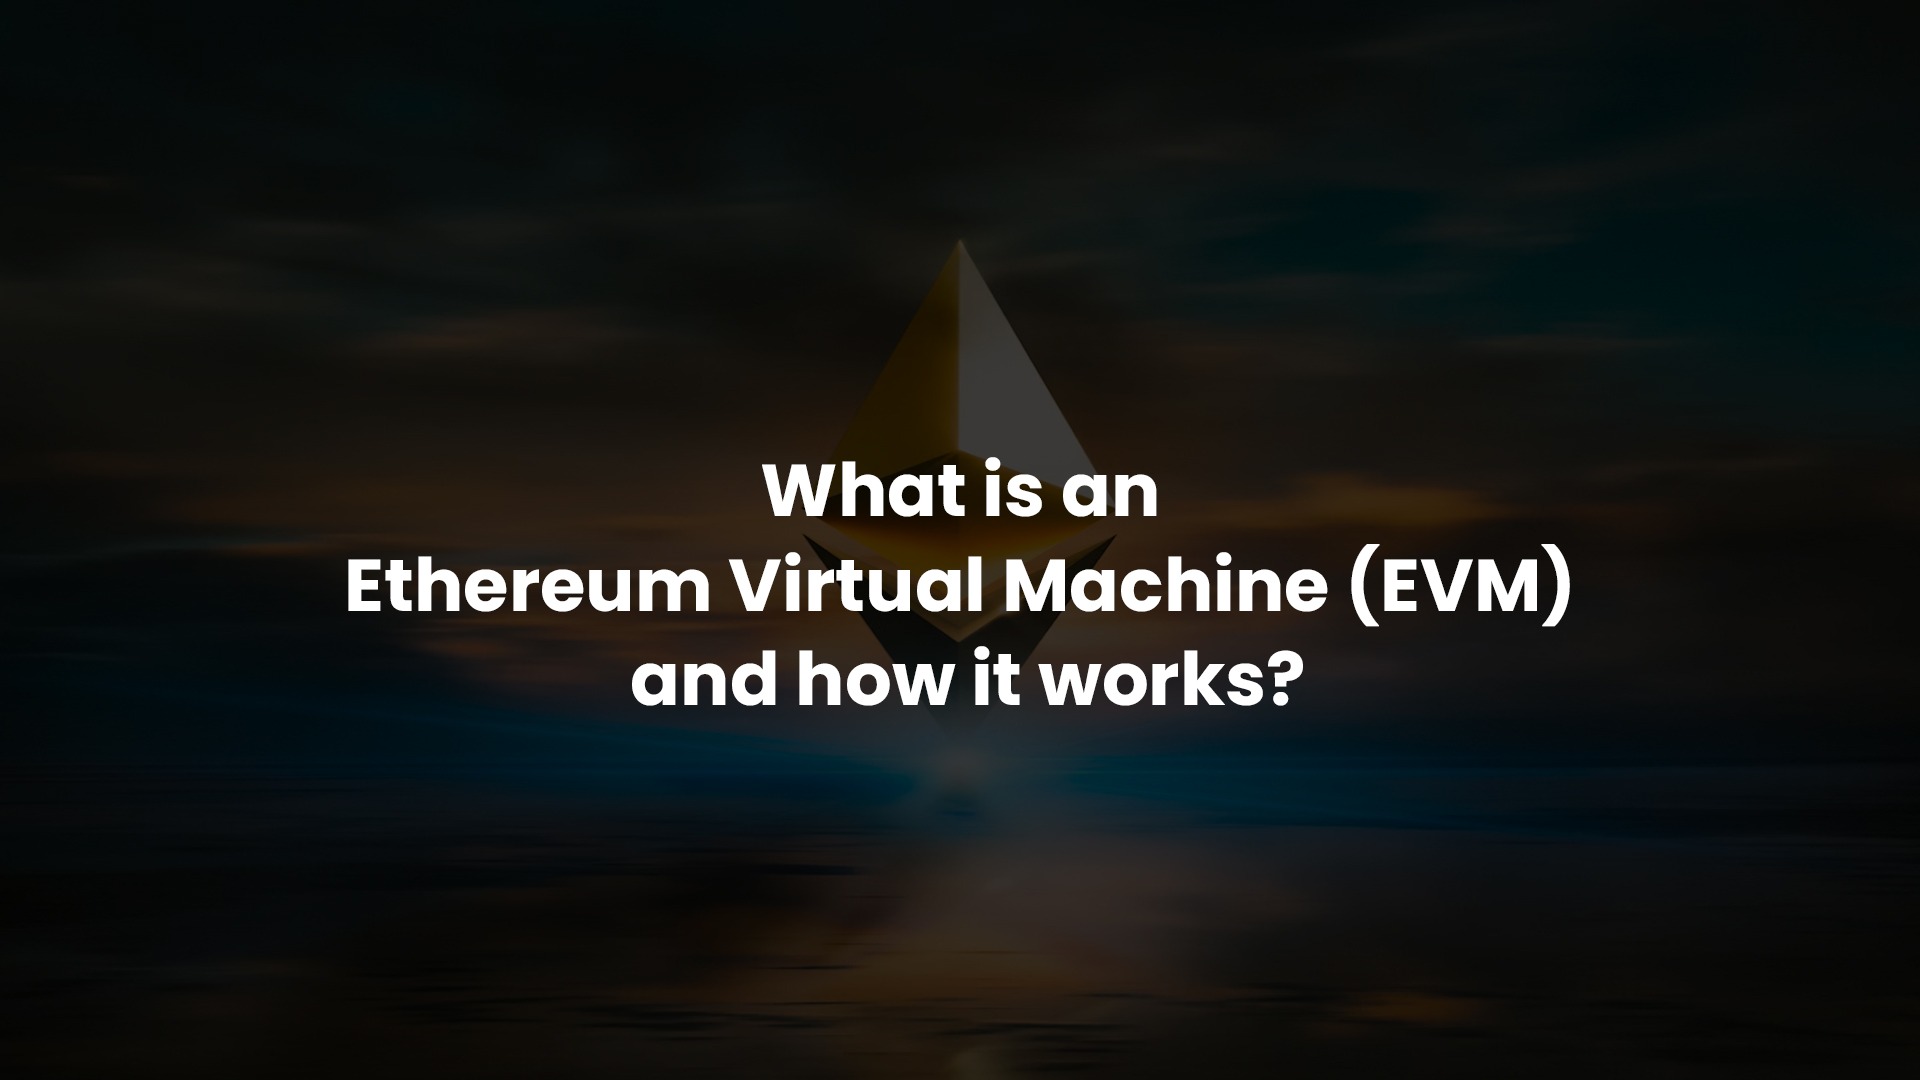 What is an Ethereum Virtual Machine (EVM) and how it works?